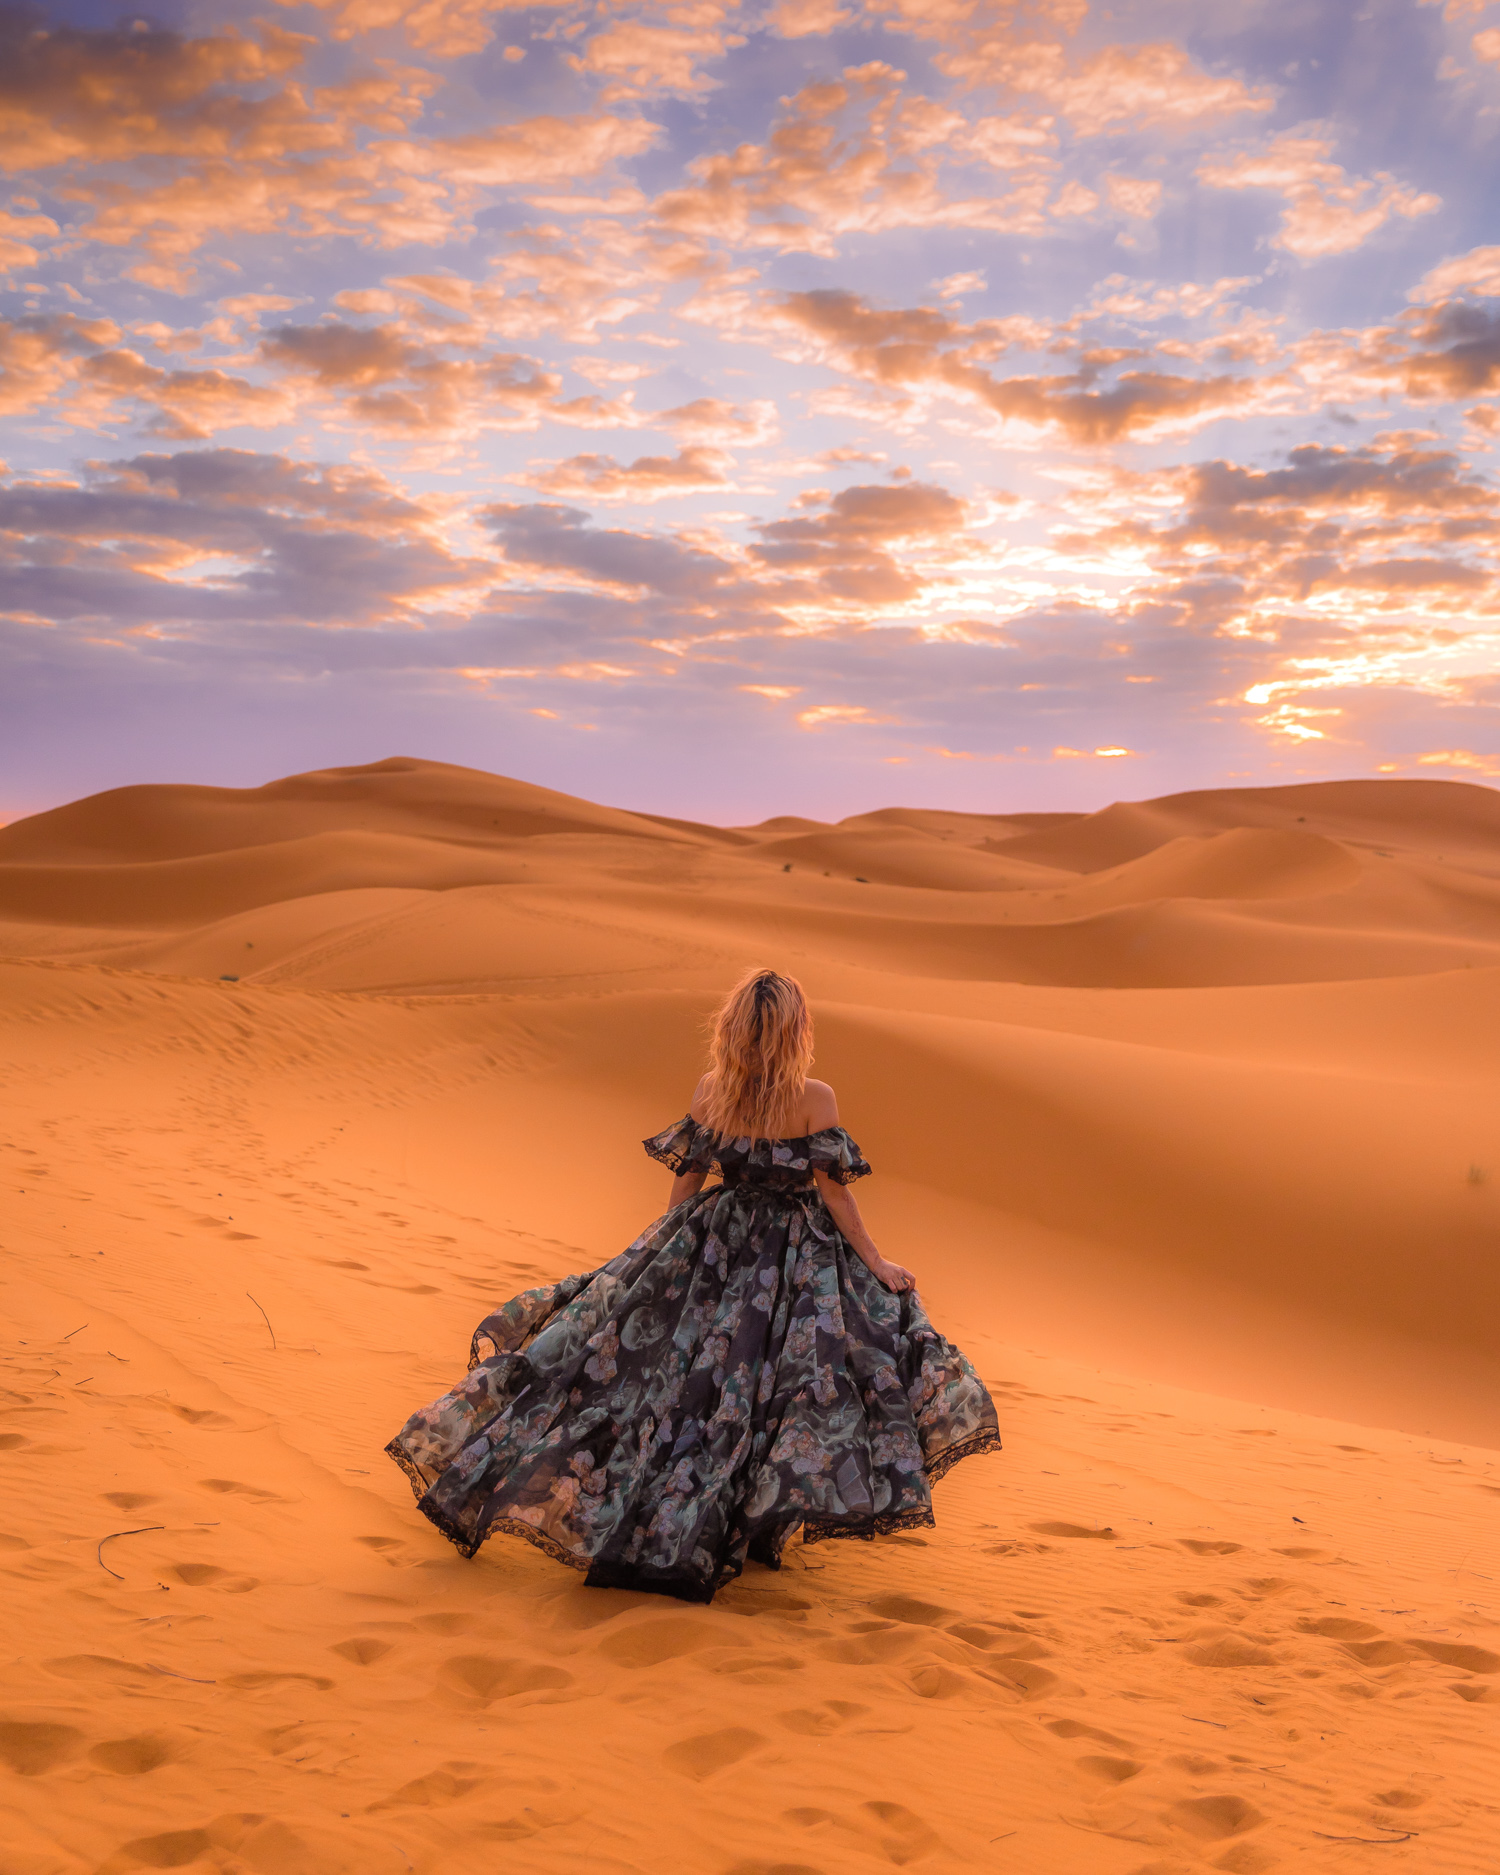 Sunrise in the Sahara, Morocco; woman in a Selkie dress